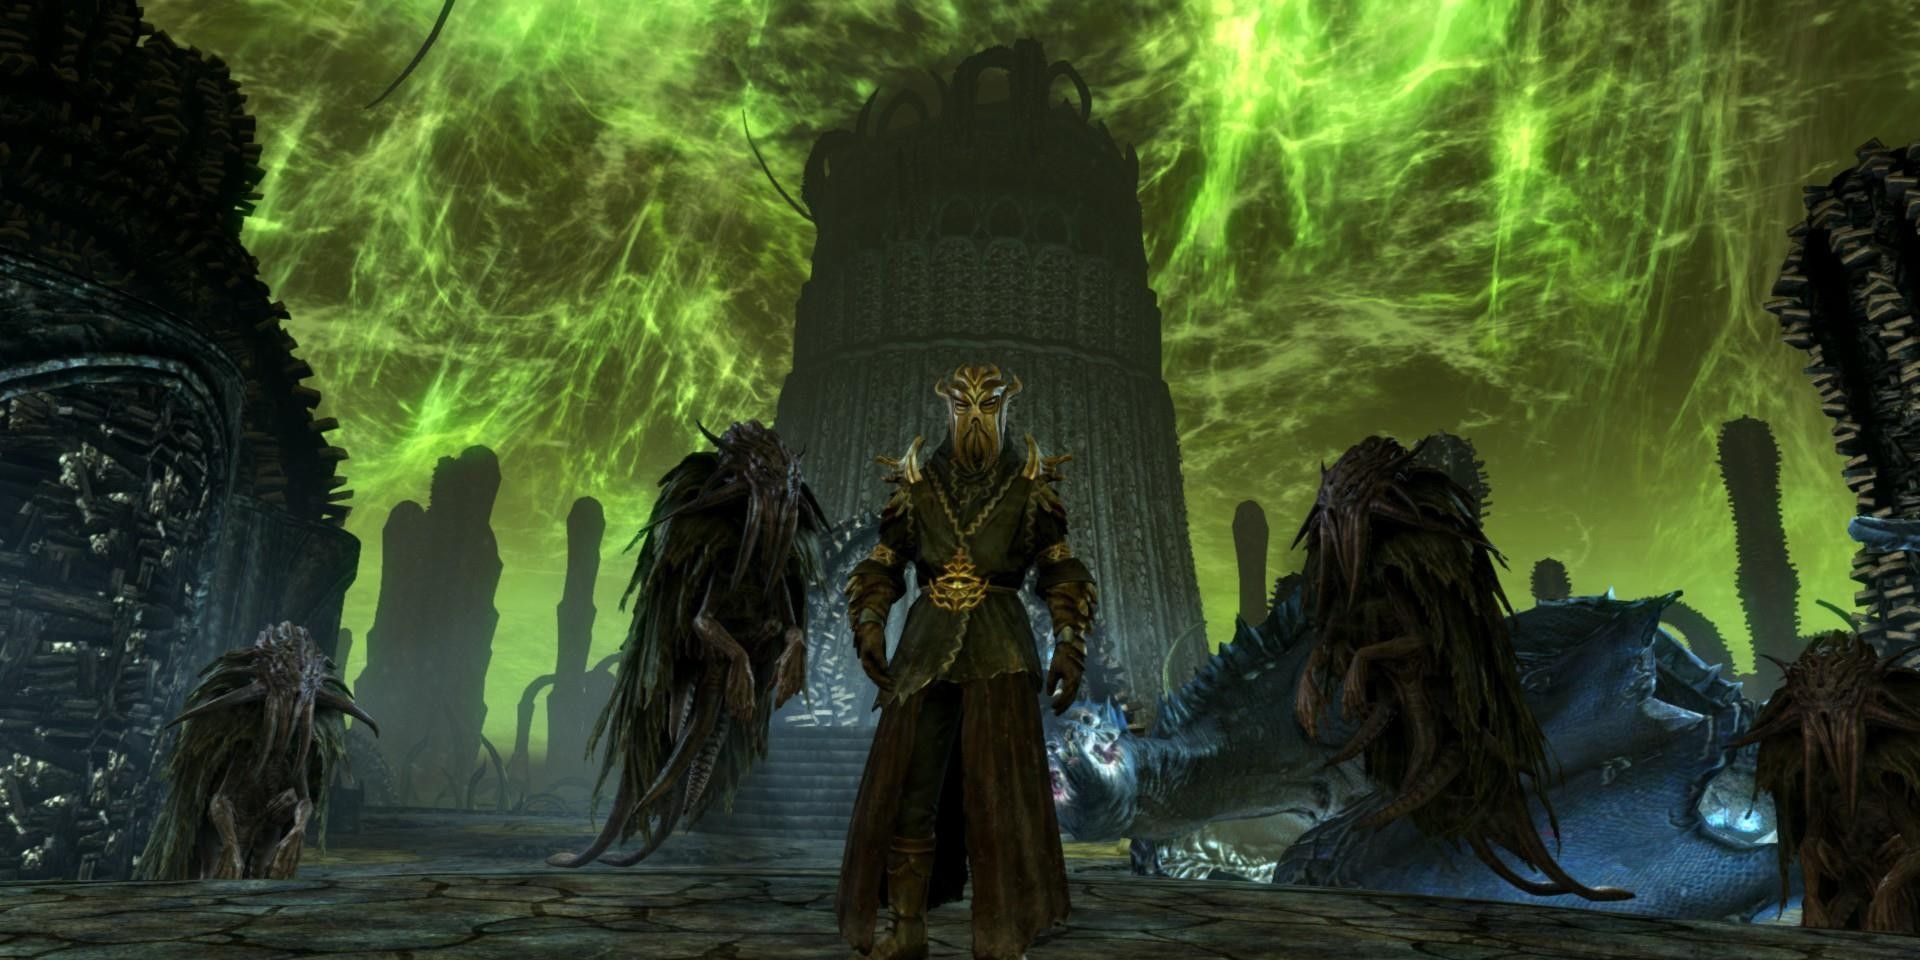 Miraak, the first Dragonborn, standing in Apocrypha, realm of Hermaeus Mora, during the events of The Elder Scrolls V: Skyrim